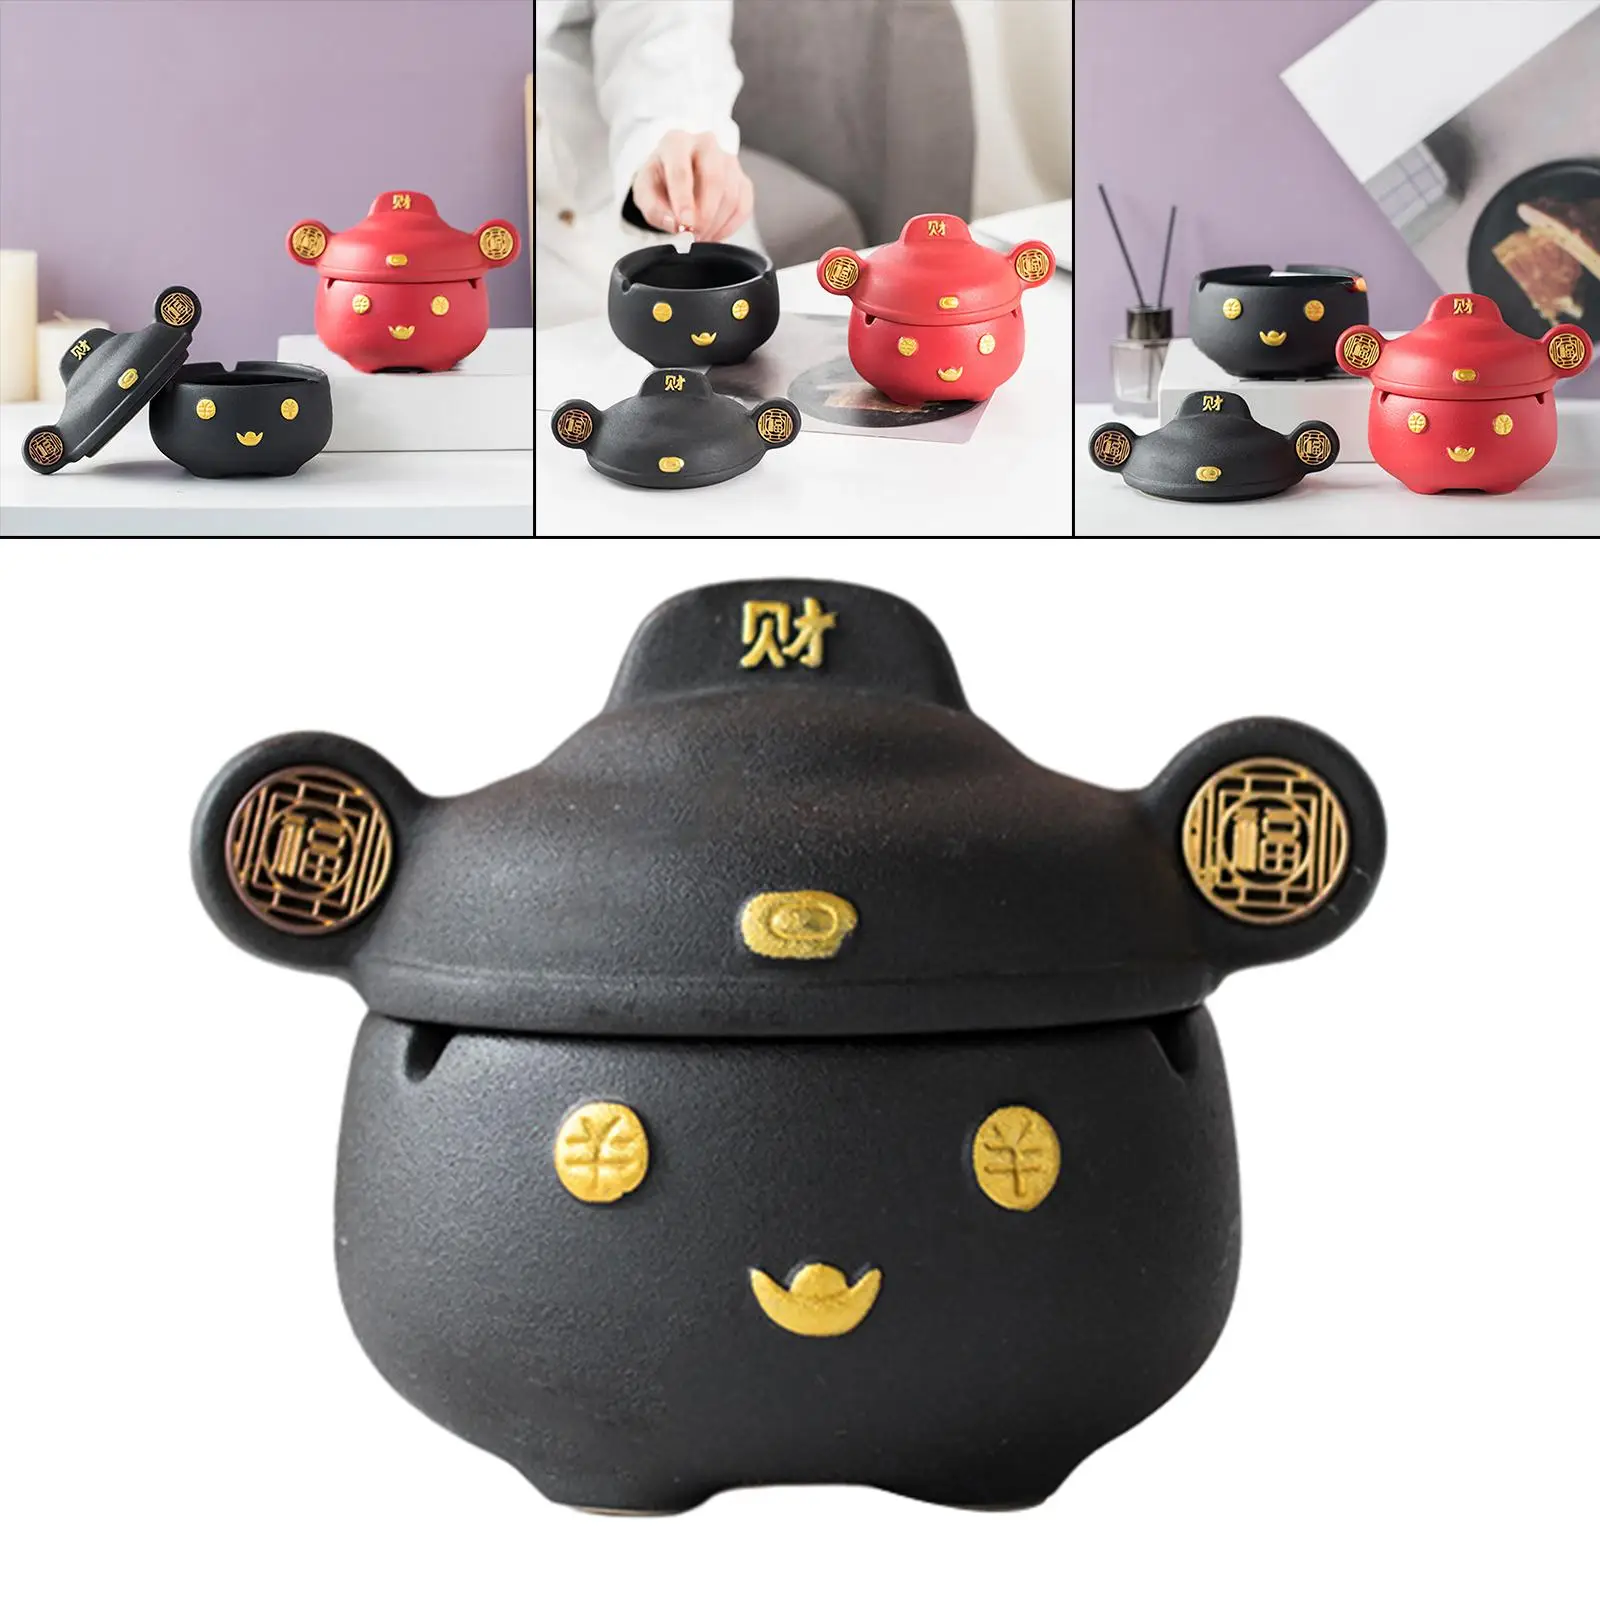 Cute Chinese GOD of Wealth Ashtray with Lid Good Luck Statue Sculpture Ash Catcher for Home Desktop Indoor Men Gift Decoration